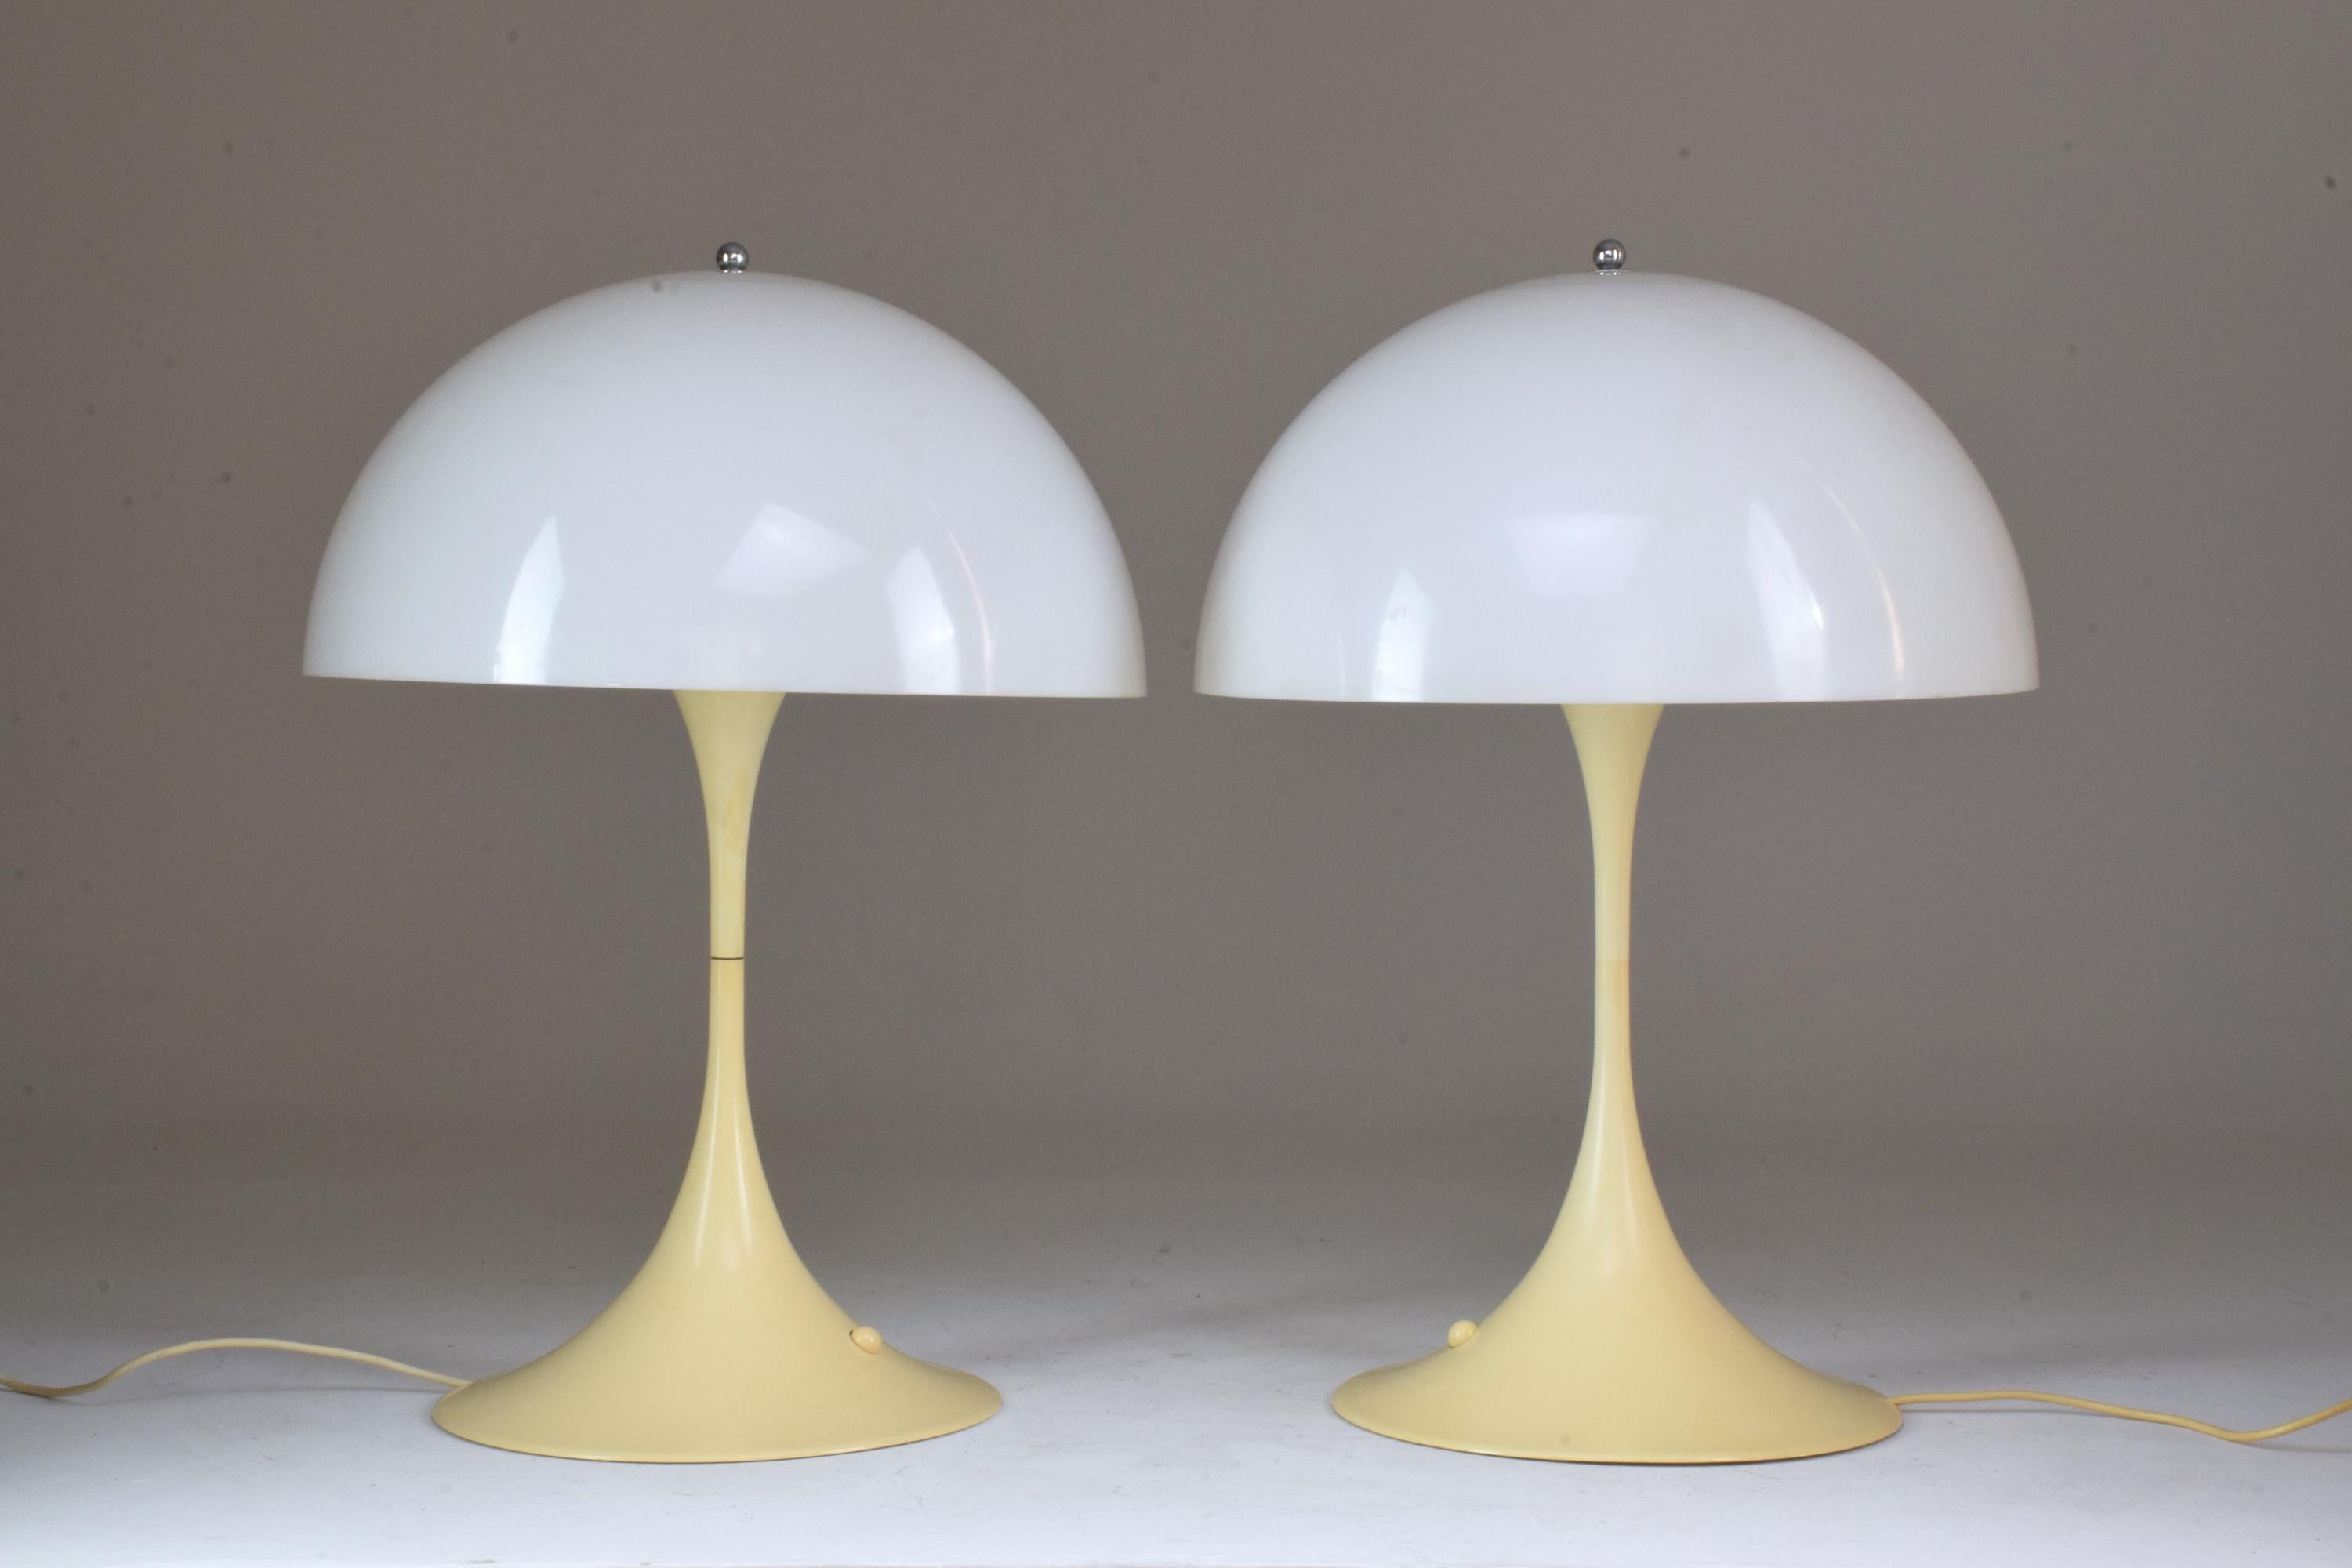 A Classic design staple pair of vintage table lamps designed by the iconic Verner Panton for Louis Poulsen Denmark in the 1970s. This 